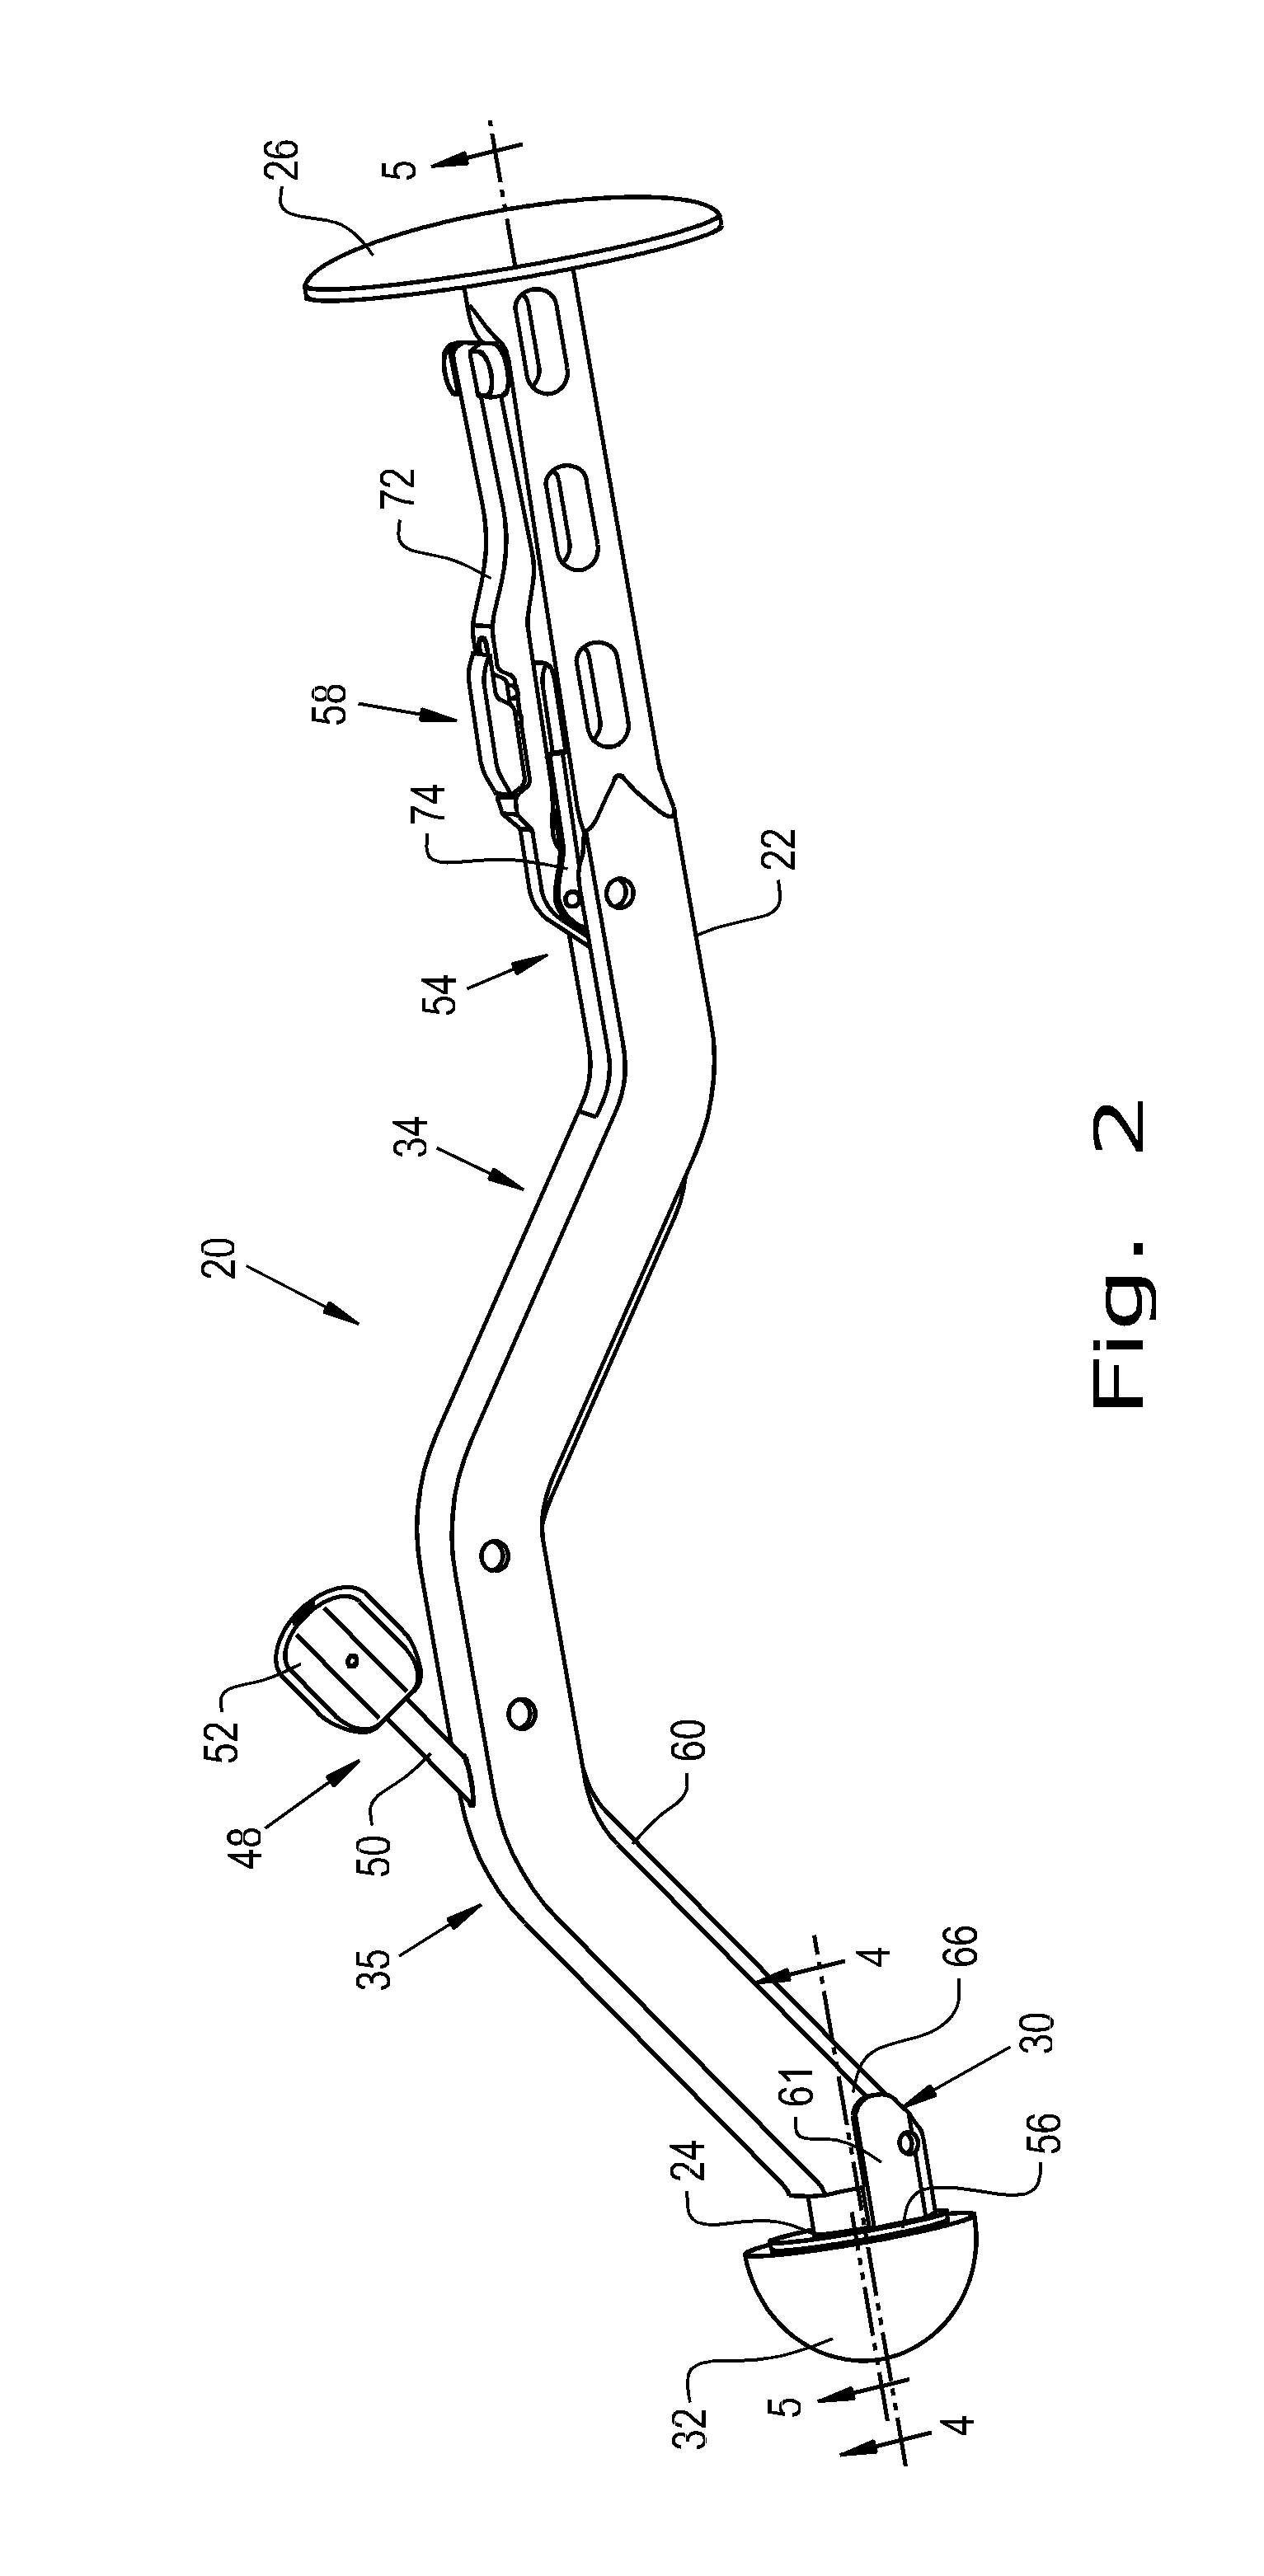 Method of attachment of implantable cup to a cup impactor